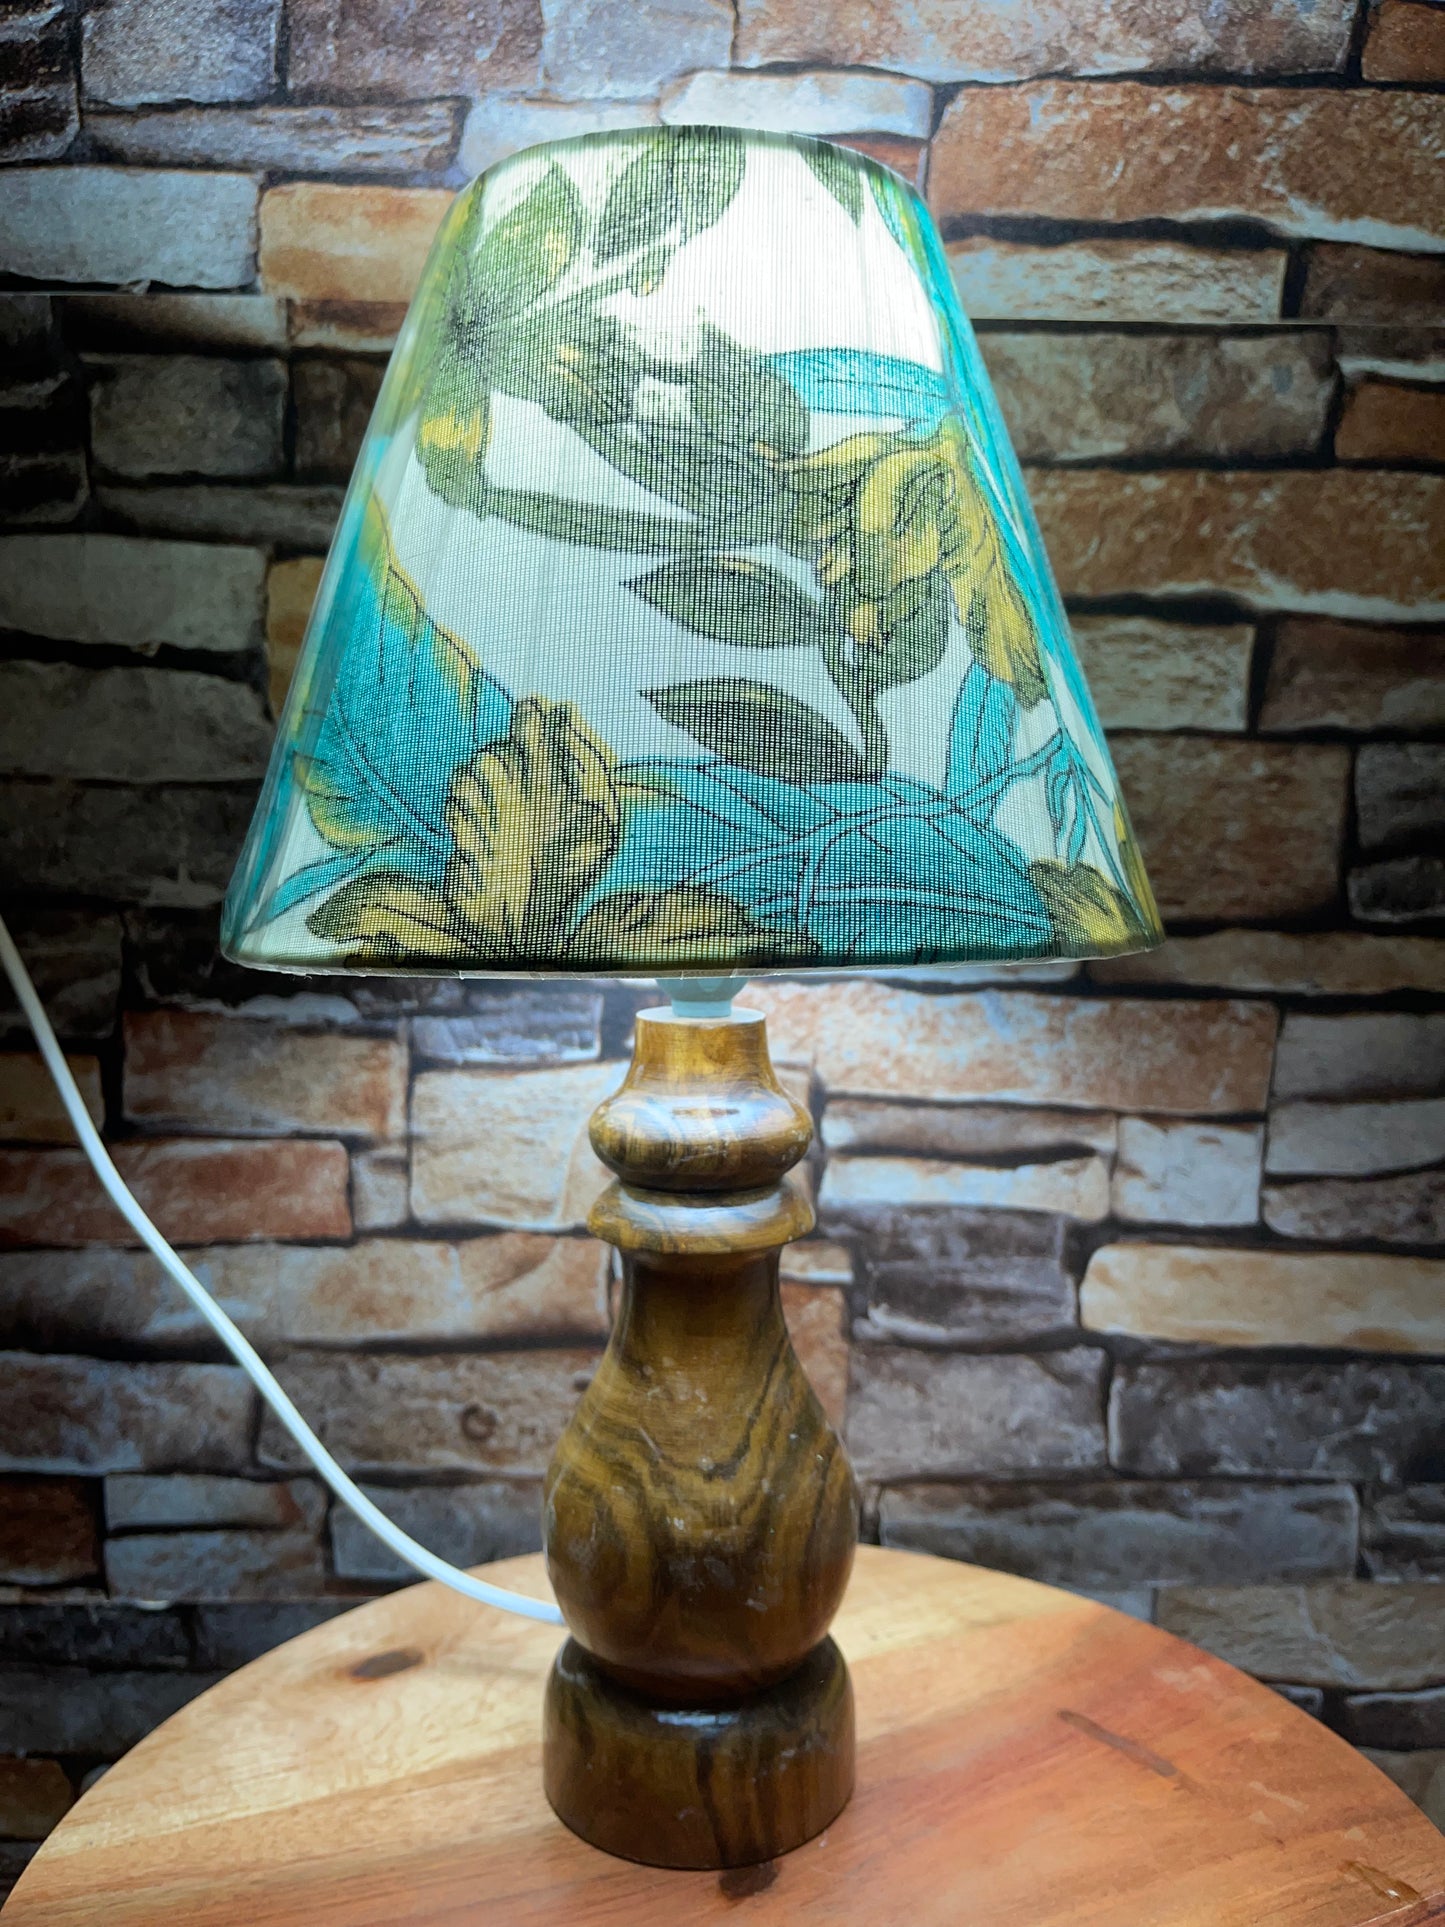 Leaves print lamp shade with wooden base